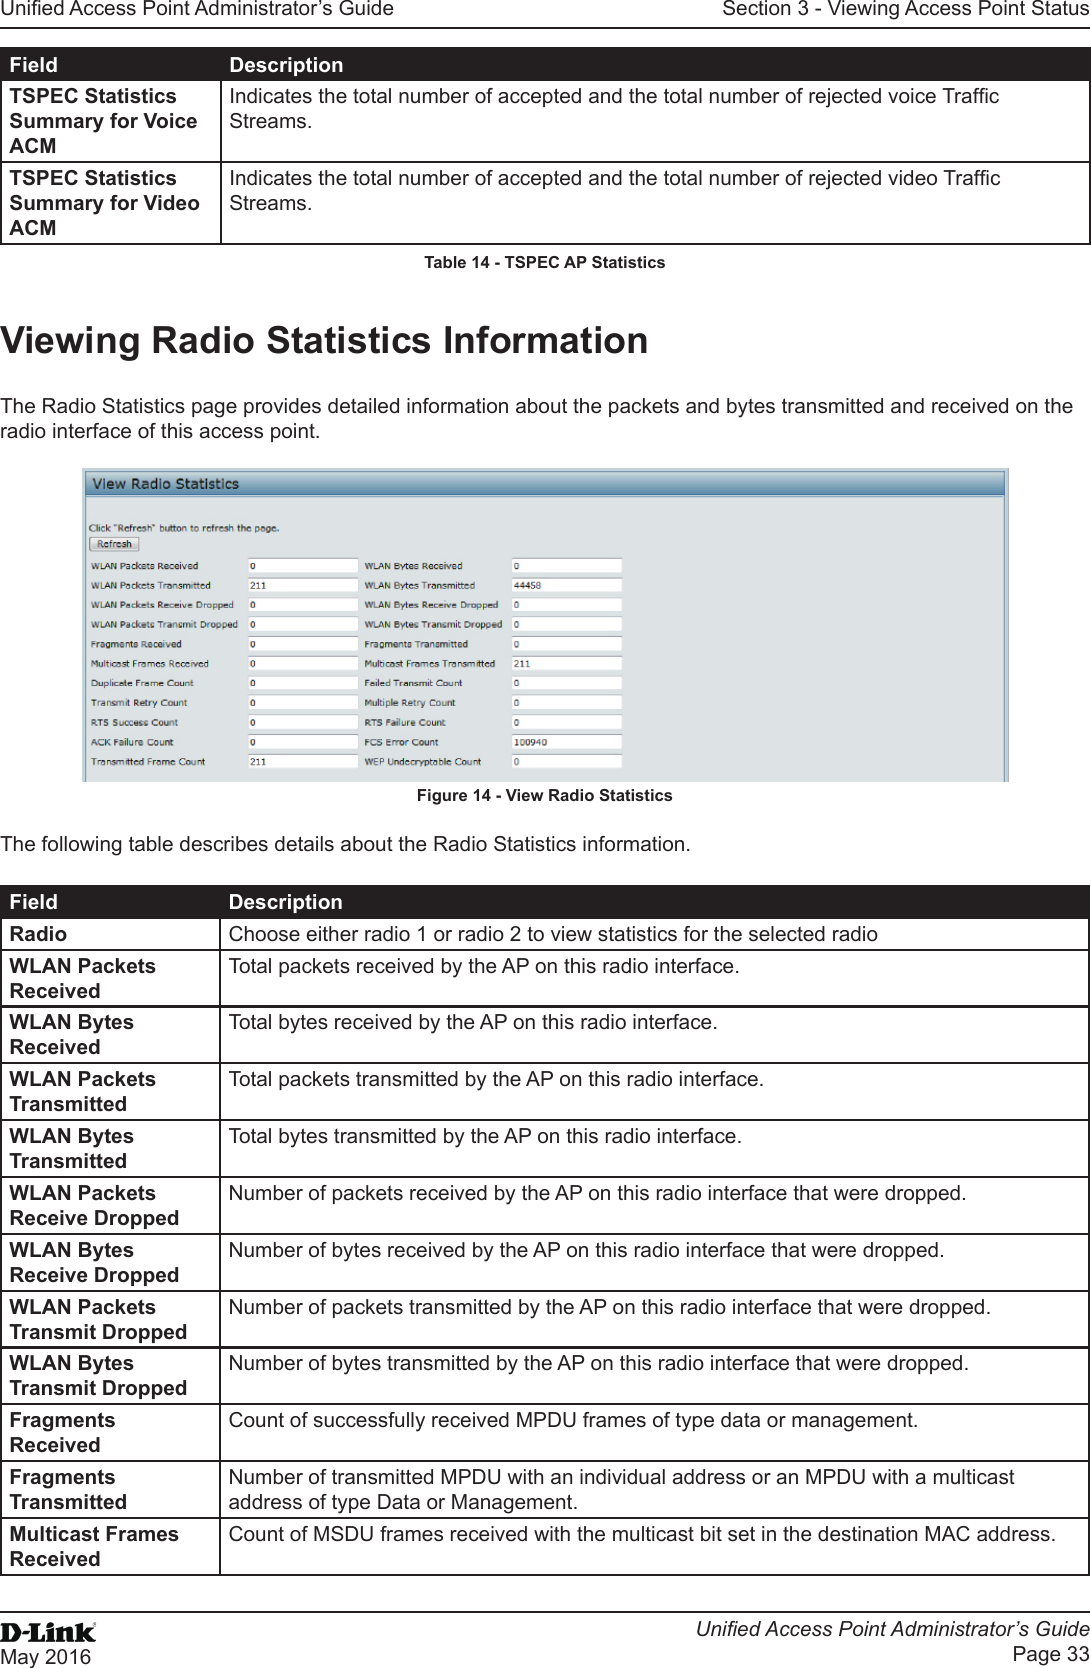 Unied Access Point Administrator’s GuideUnied Access Point Administrator’s GuidePage 33May 2016Section 3 - Viewing Access Point StatusField DescriptionTSPEC Statistics Summary for Voice ACMIndicates the total number of accepted and the total number of rejected voice Trafc Streams.TSPEC Statistics Summary for Video ACMIndicates the total number of accepted and the total number of rejected video Trafc Streams.Table 14 - TSPEC AP StatisticsViewing Radio Statistics InformationThe Radio Statistics page provides detailed information about the packets and bytes transmitted and received on the radio interface of this access point.Figure 14 - View Radio StatisticsThe following table describes details about the Radio Statistics information.Field DescriptionRadio Choose either radio 1 or radio 2 to view statistics for the selected radioWLAN Packets ReceivedTotal packets received by the AP on this radio interface.WLAN Bytes ReceivedTotal bytes received by the AP on this radio interface.WLAN Packets TransmittedTotal packets transmitted by the AP on this radio interface.WLAN Bytes TransmittedTotal bytes transmitted by the AP on this radio interface.WLAN Packets Receive DroppedNumber of packets received by the AP on this radio interface that were dropped.WLAN Bytes Receive DroppedNumber of bytes received by the AP on this radio interface that were dropped.WLAN Packets Transmit DroppedNumber of packets transmitted by the AP on this radio interface that were dropped.WLAN Bytes Transmit DroppedNumber of bytes transmitted by the AP on this radio interface that were dropped.Fragments ReceivedCount of successfully received MPDU frames of type data or management.Fragments TransmittedNumber of transmitted MPDU with an individual address or an MPDU with a multicast address of type Data or Management.Multicast Frames ReceivedCount of MSDU frames received with the multicast bit set in the destination MAC address.